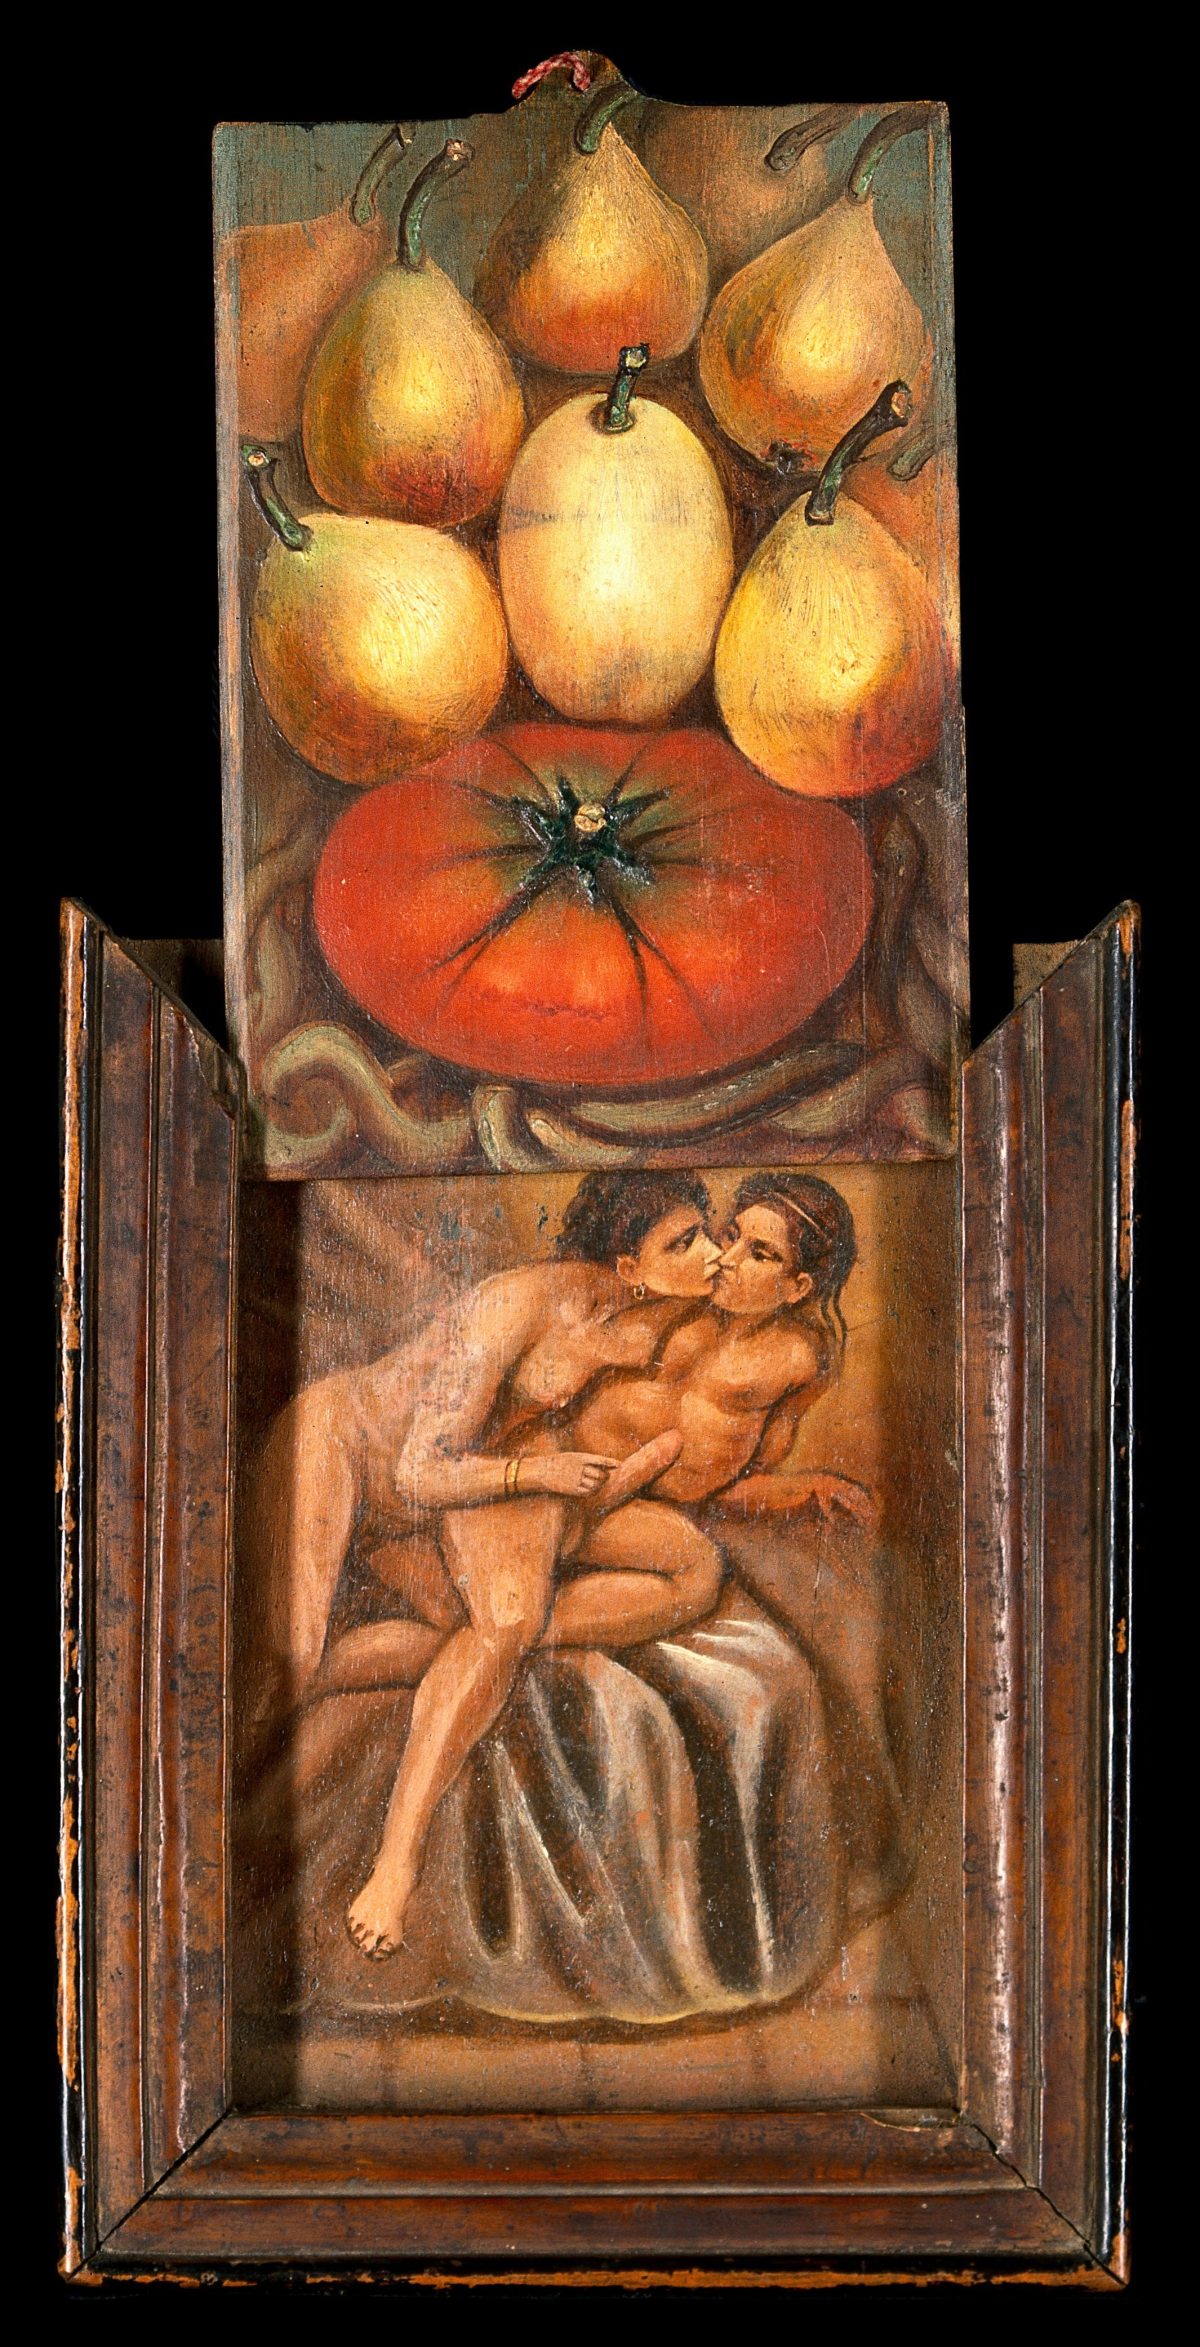 Figs and a tomato. Oil painting by Summonte